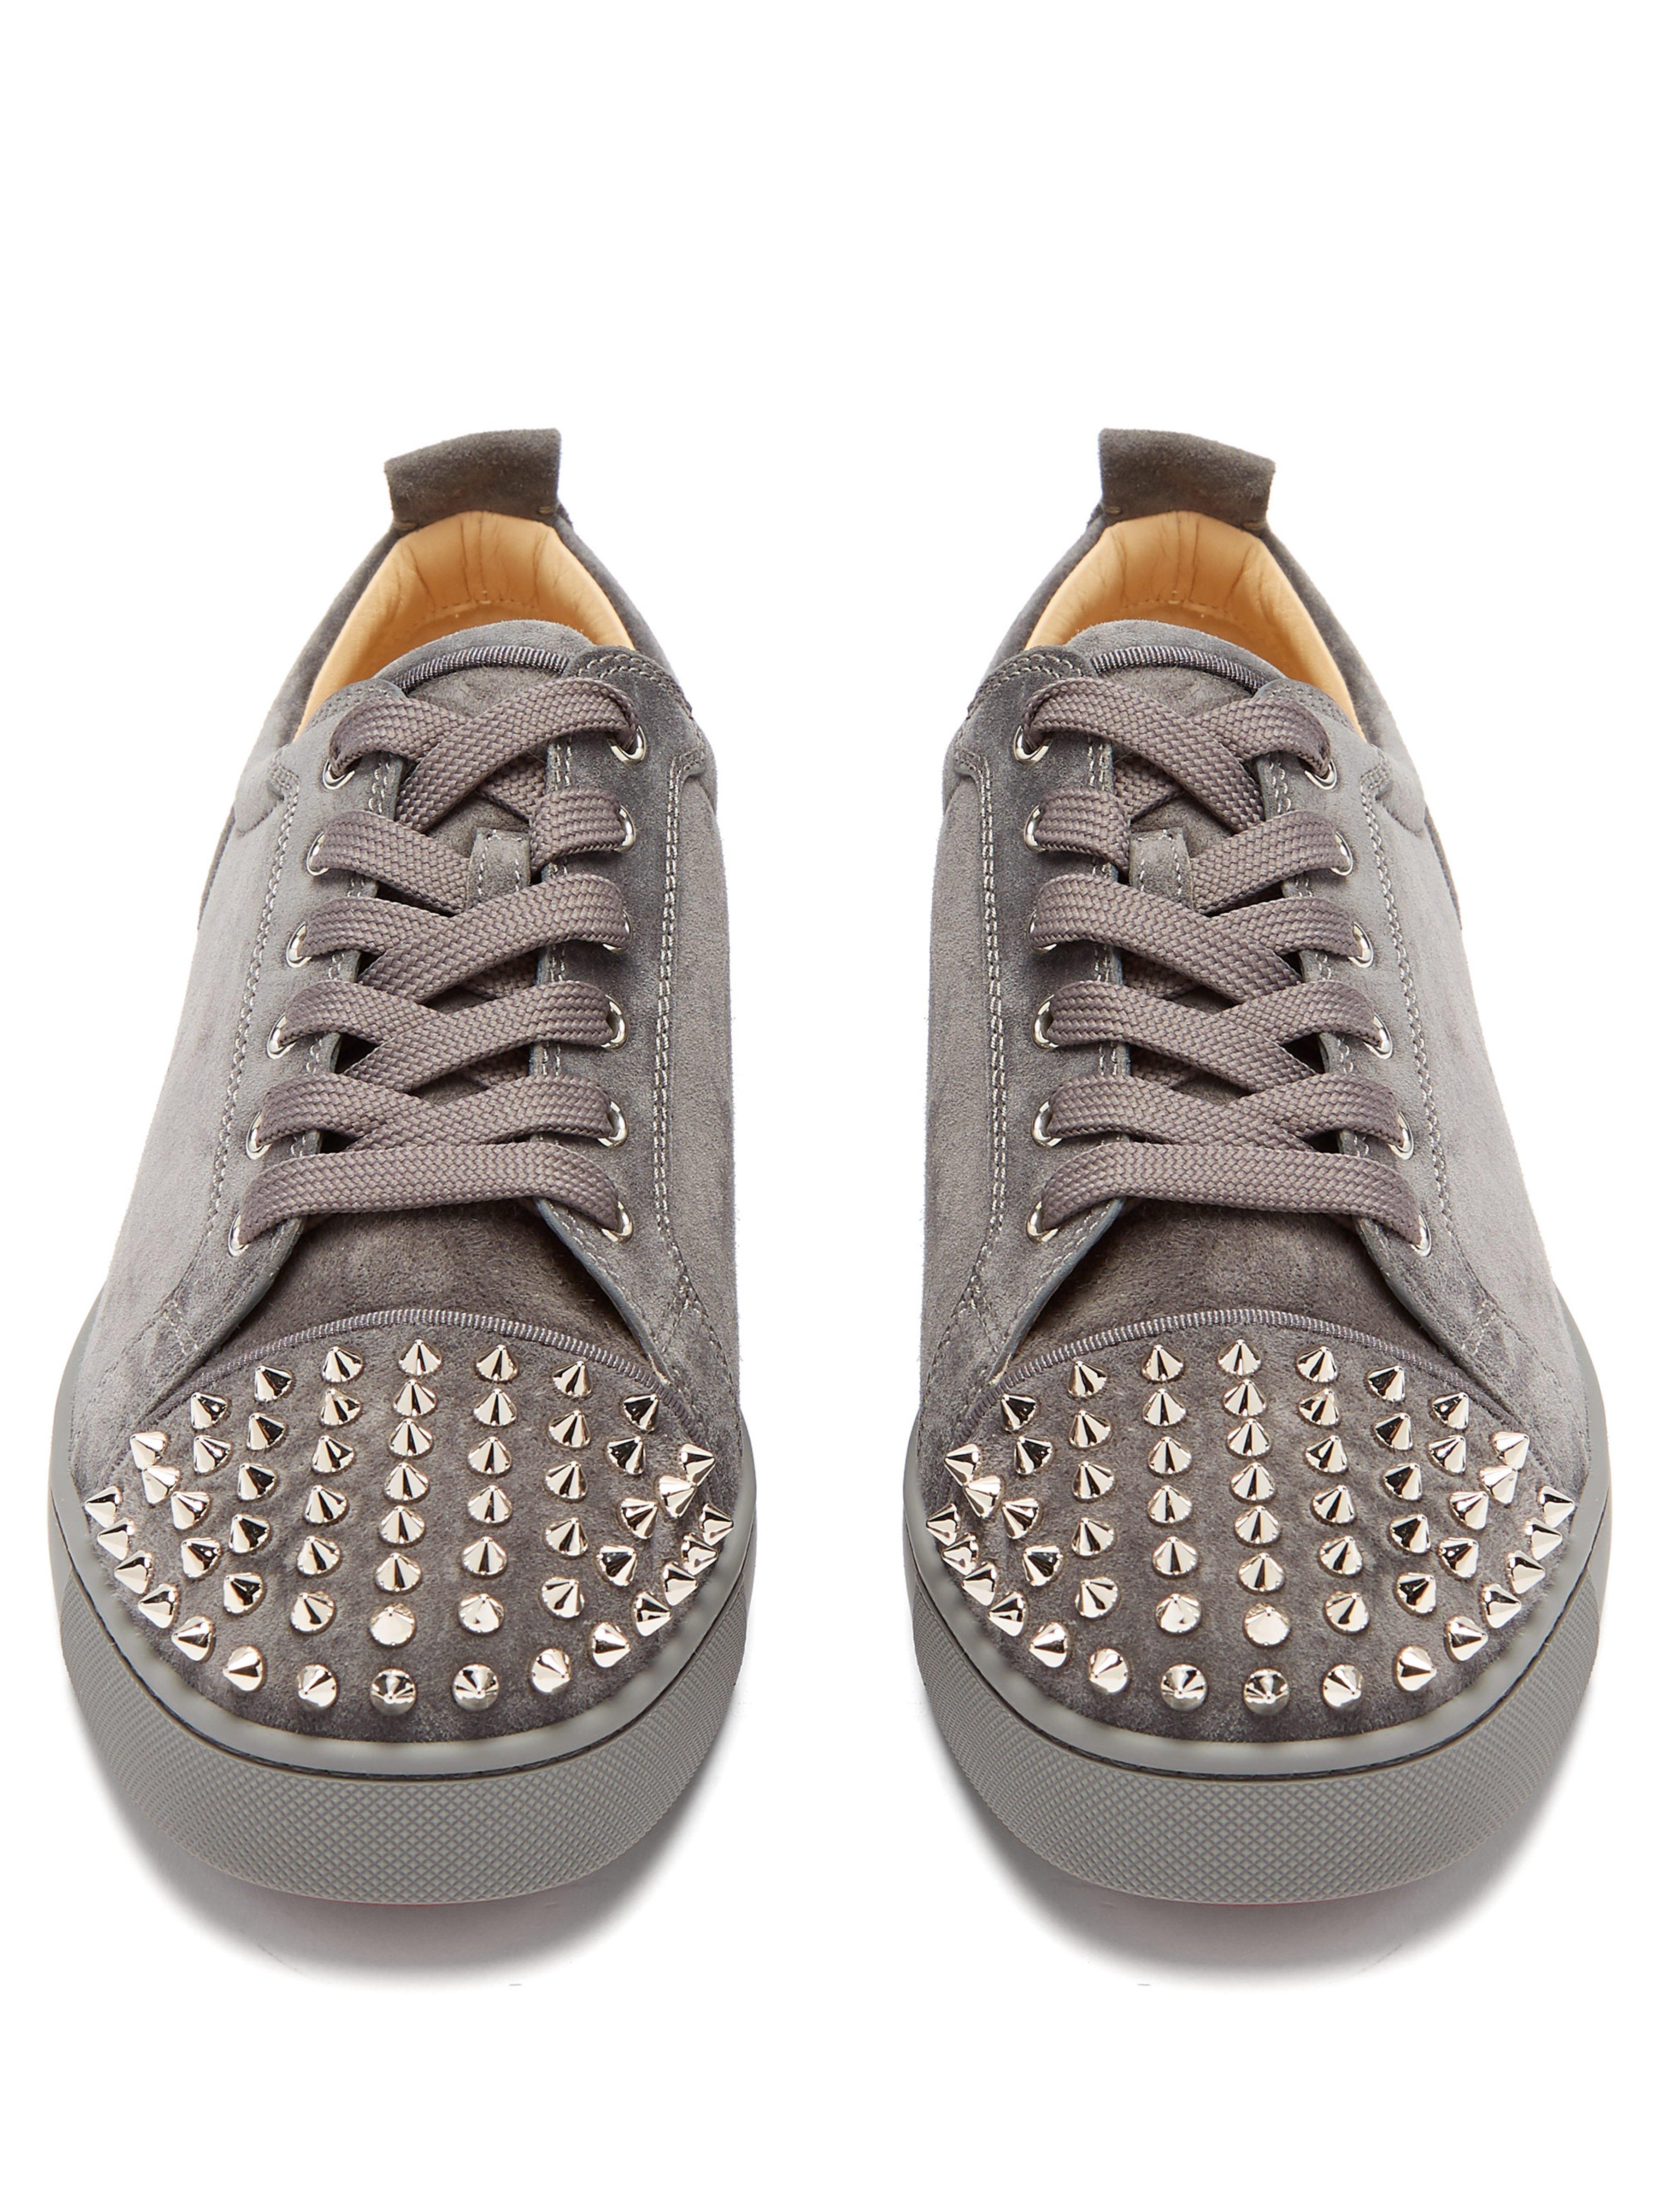 Christian Louboutin Louis Spiked Suede Sneakers Dark Grey (Grey) for Men - Lyst